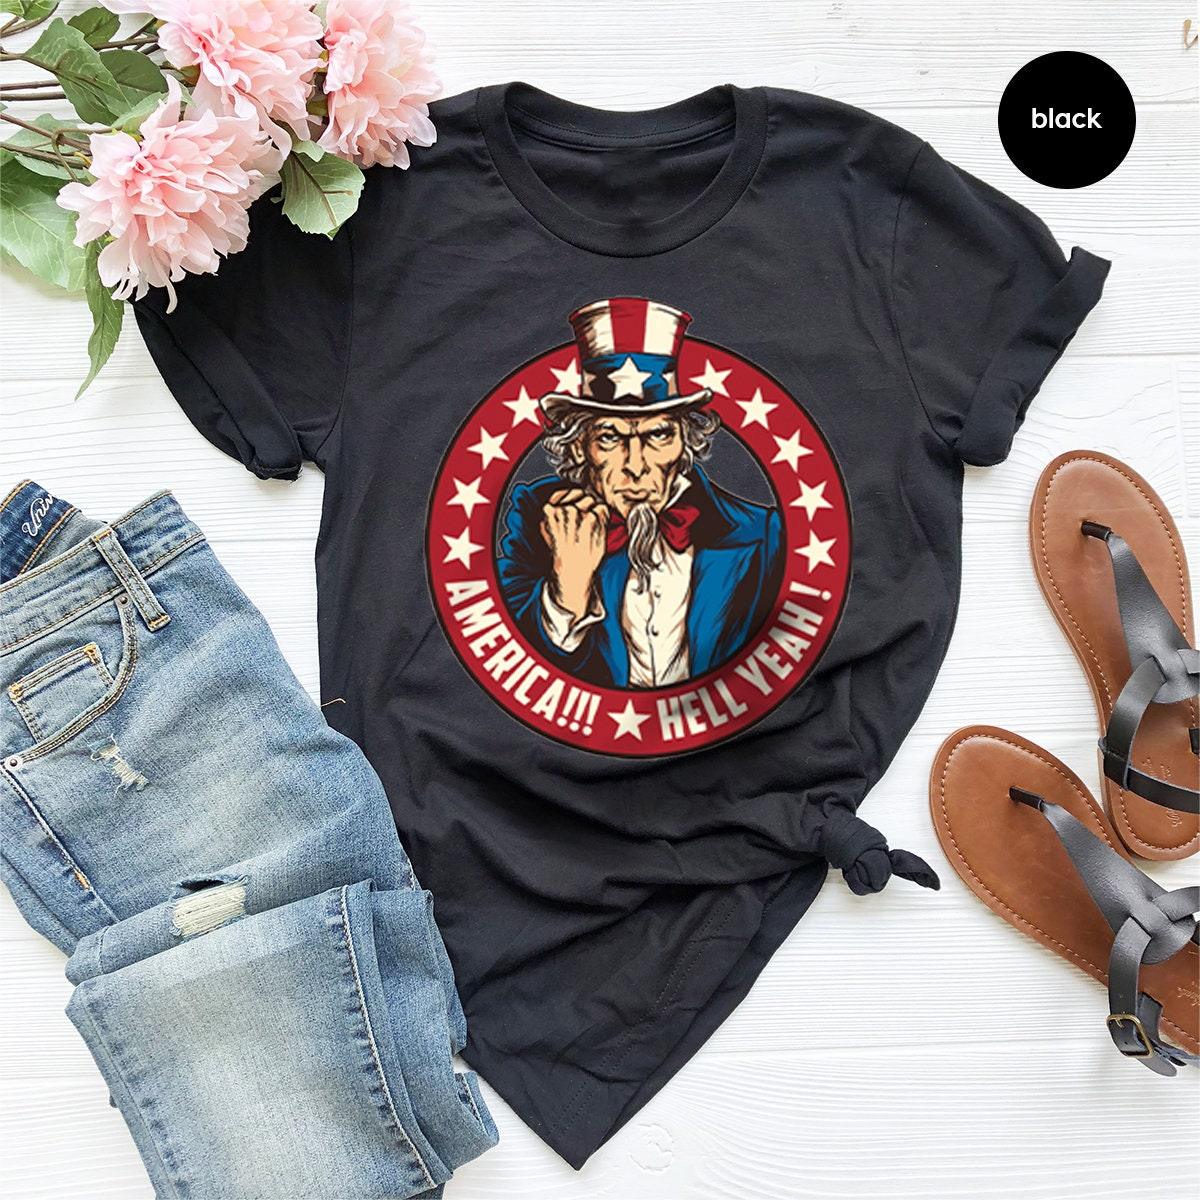 America Shirt, America Hell Yeah, Uncle Sam, Patriotic Shirt, USA Shirt, Election 2020 Shirt, 4th July Shirt, Independence Day, Political T - Fastdeliverytees.com